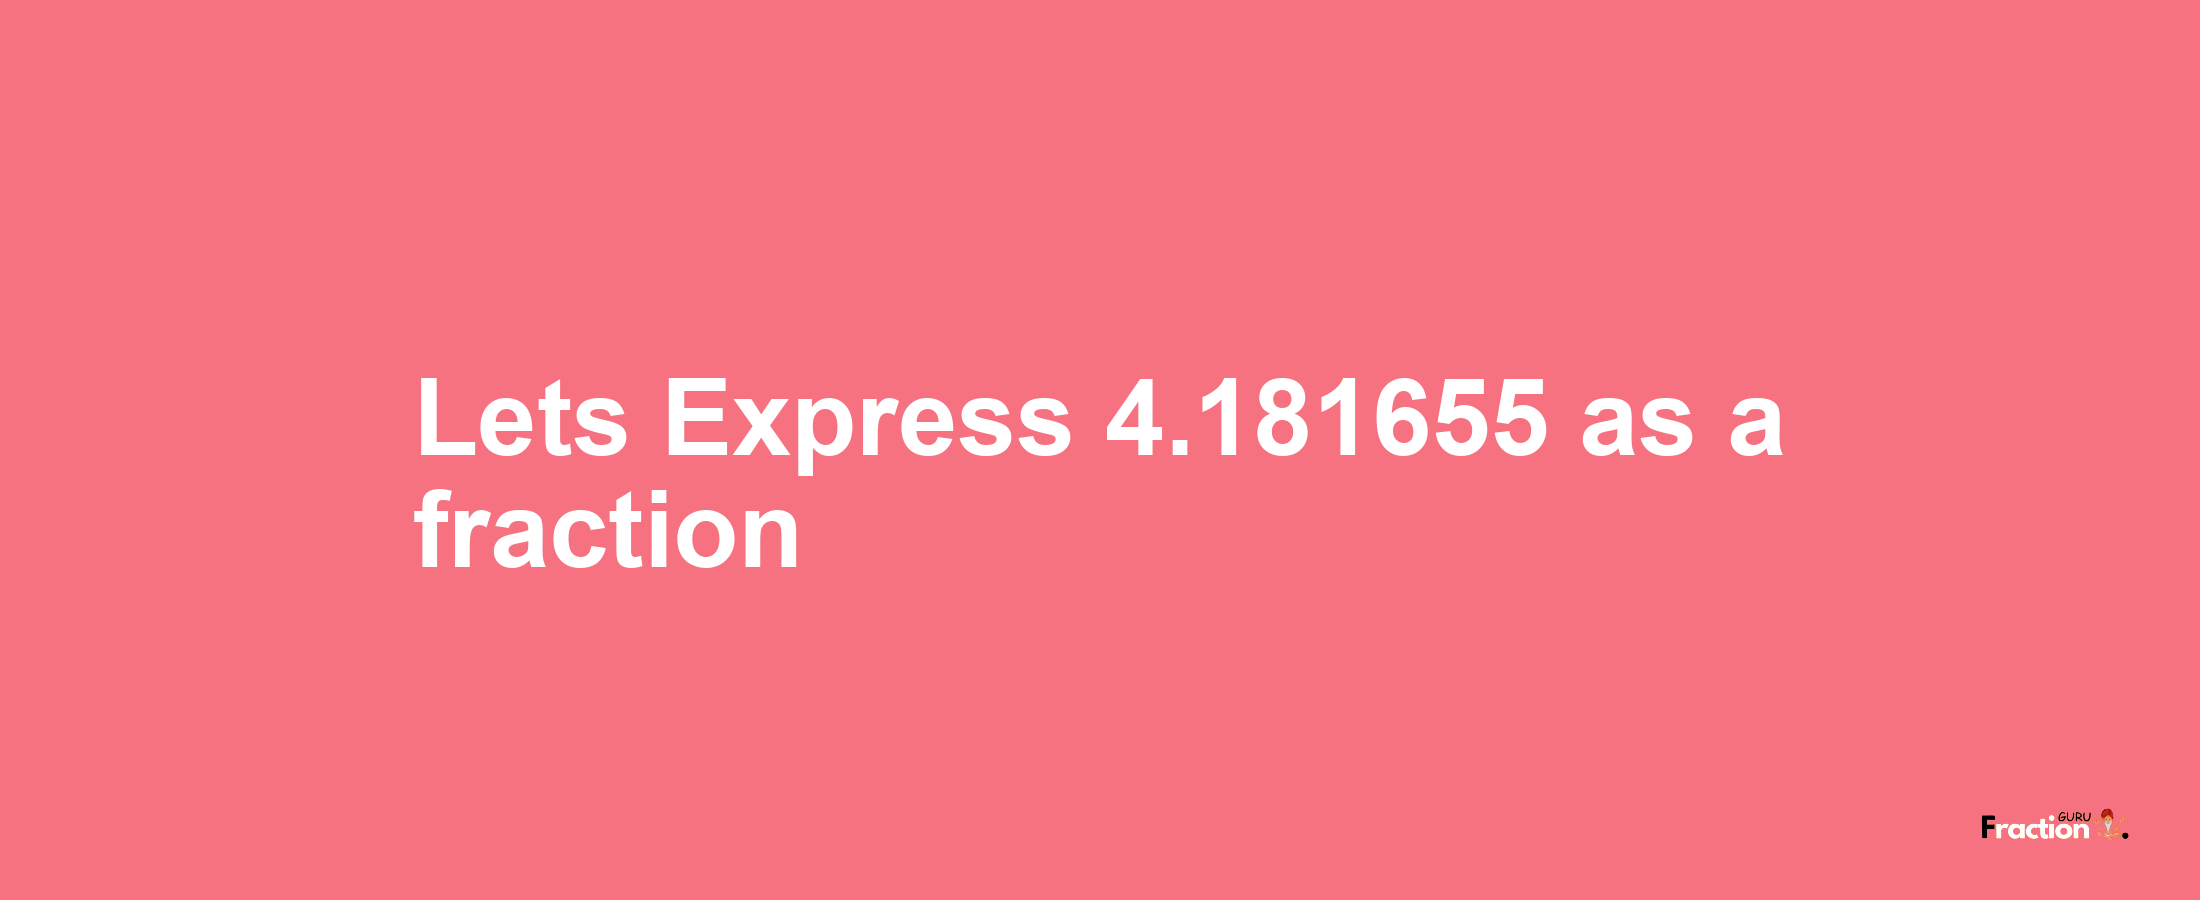 Lets Express 4.181655 as afraction